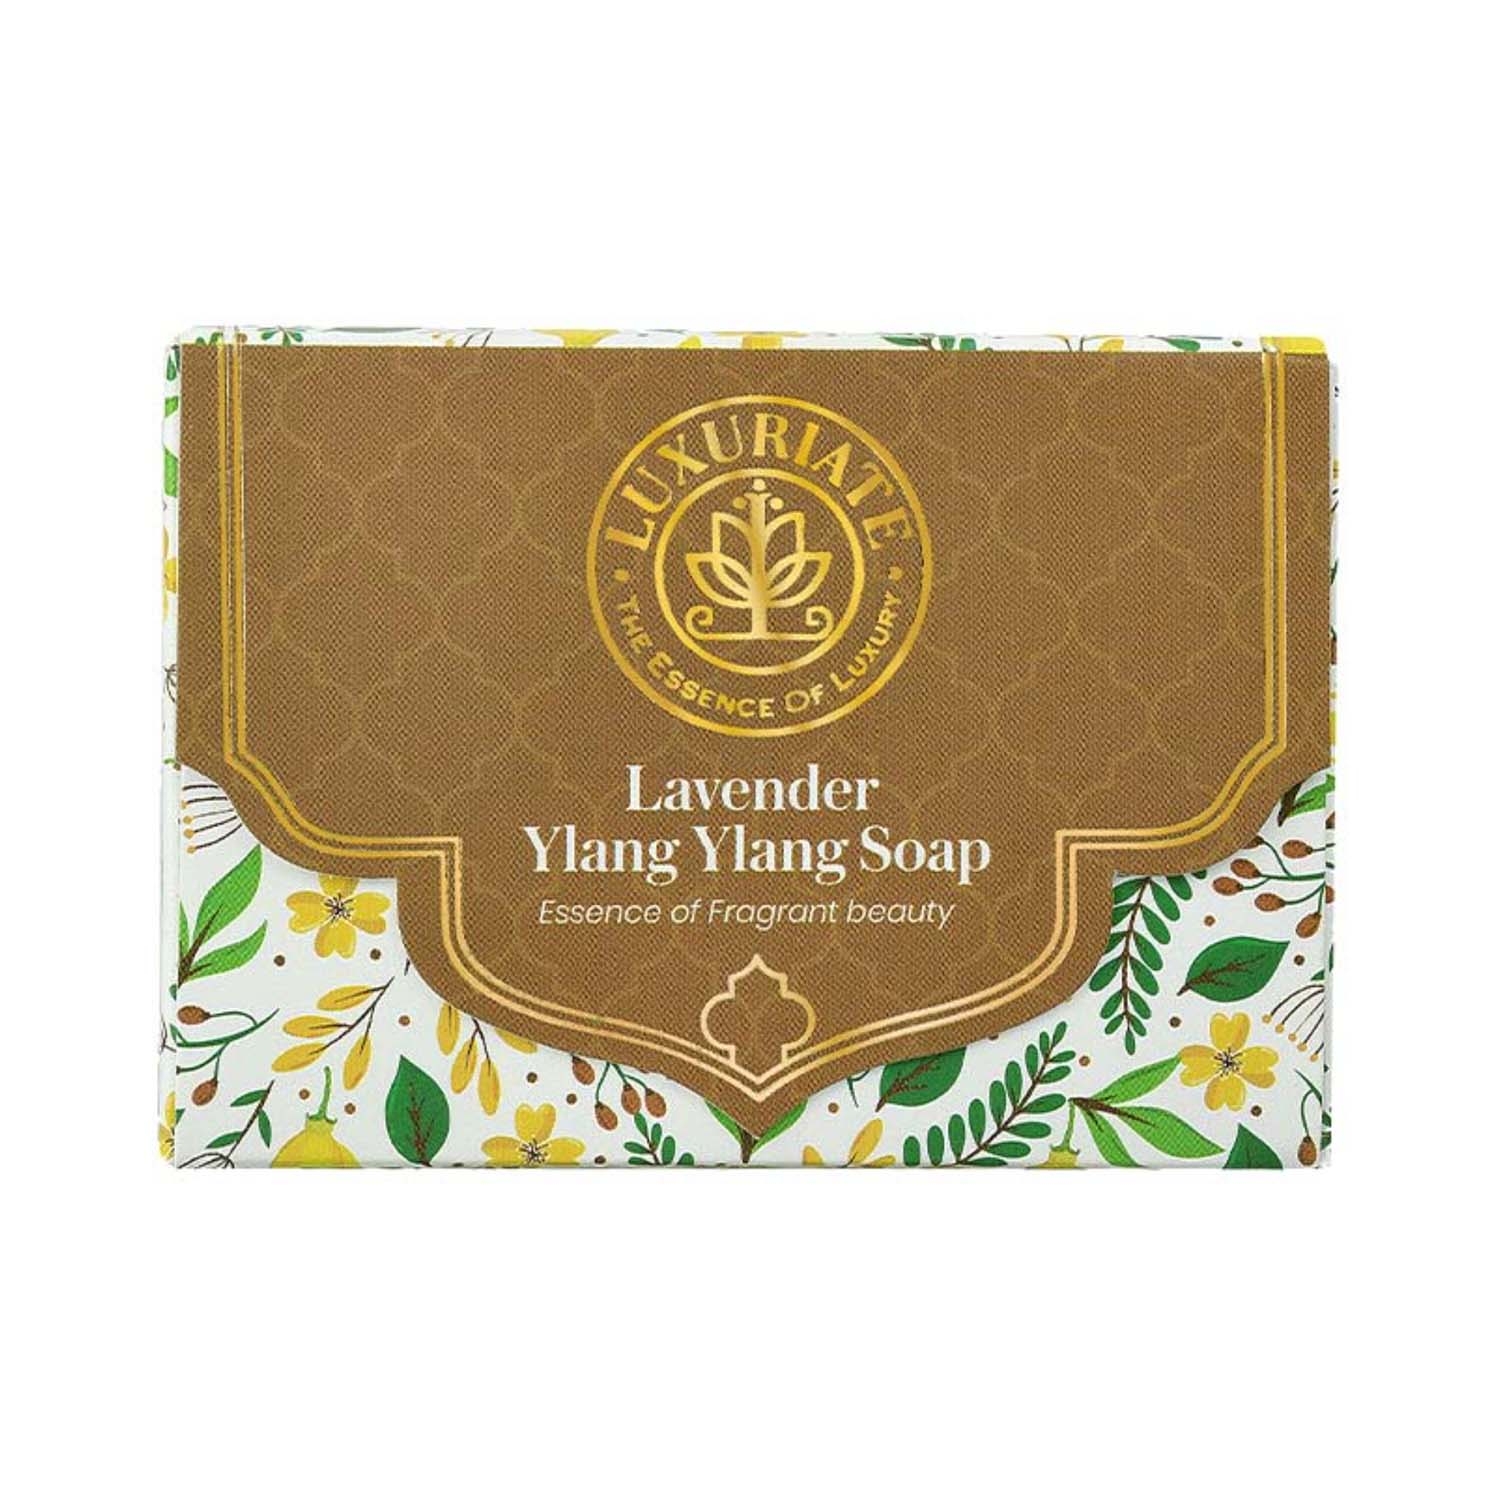 LUXURIATE Lavender Ylang Ylang Essence Of Fragrant Beauty Soap (125g)